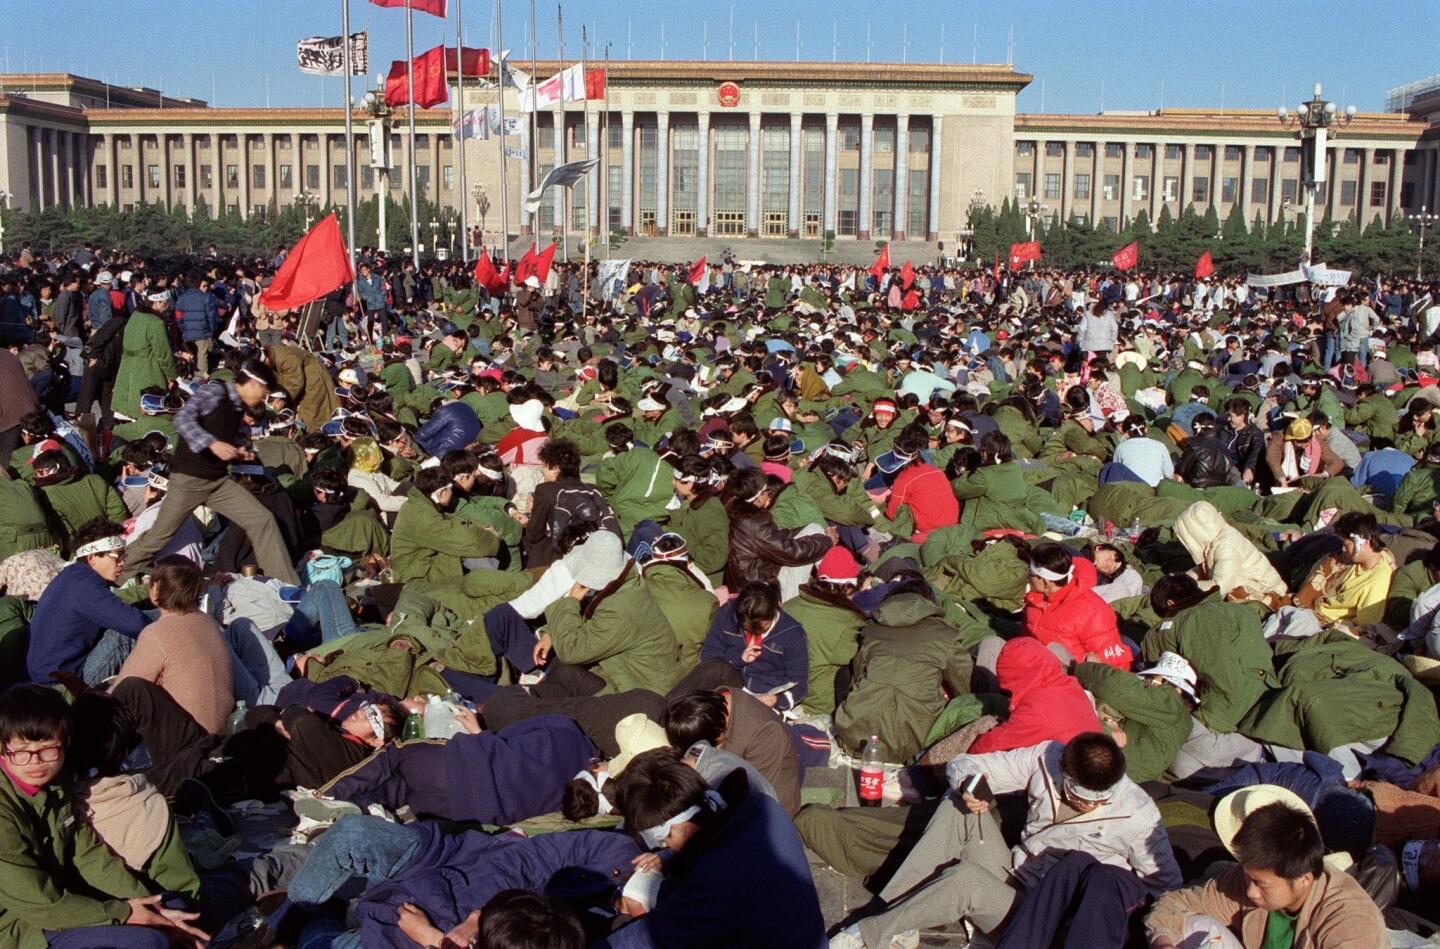 Chinese student hunger strikers lie down en masse in Tiananmen Square in May, 1989.